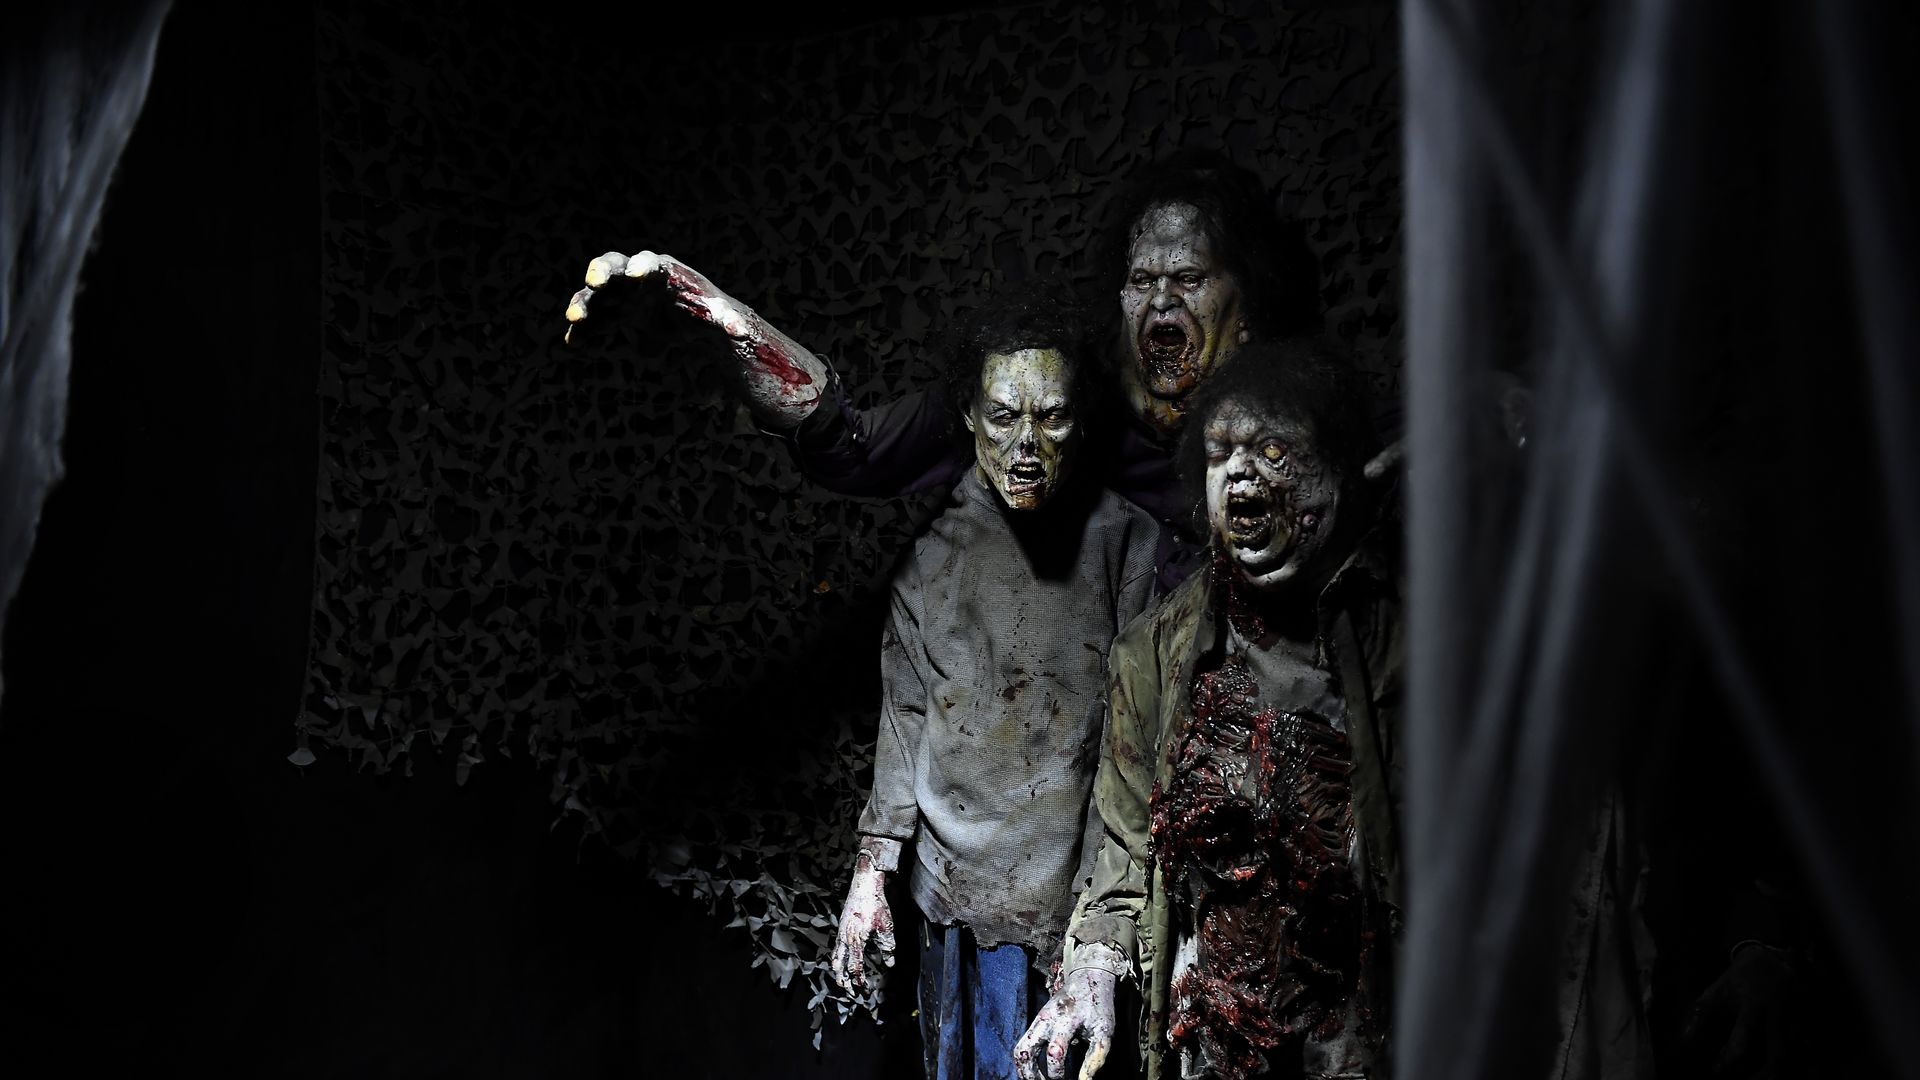 The guests of the 13th Floor Haunted House in Denver, Colorado on October 2, 2019